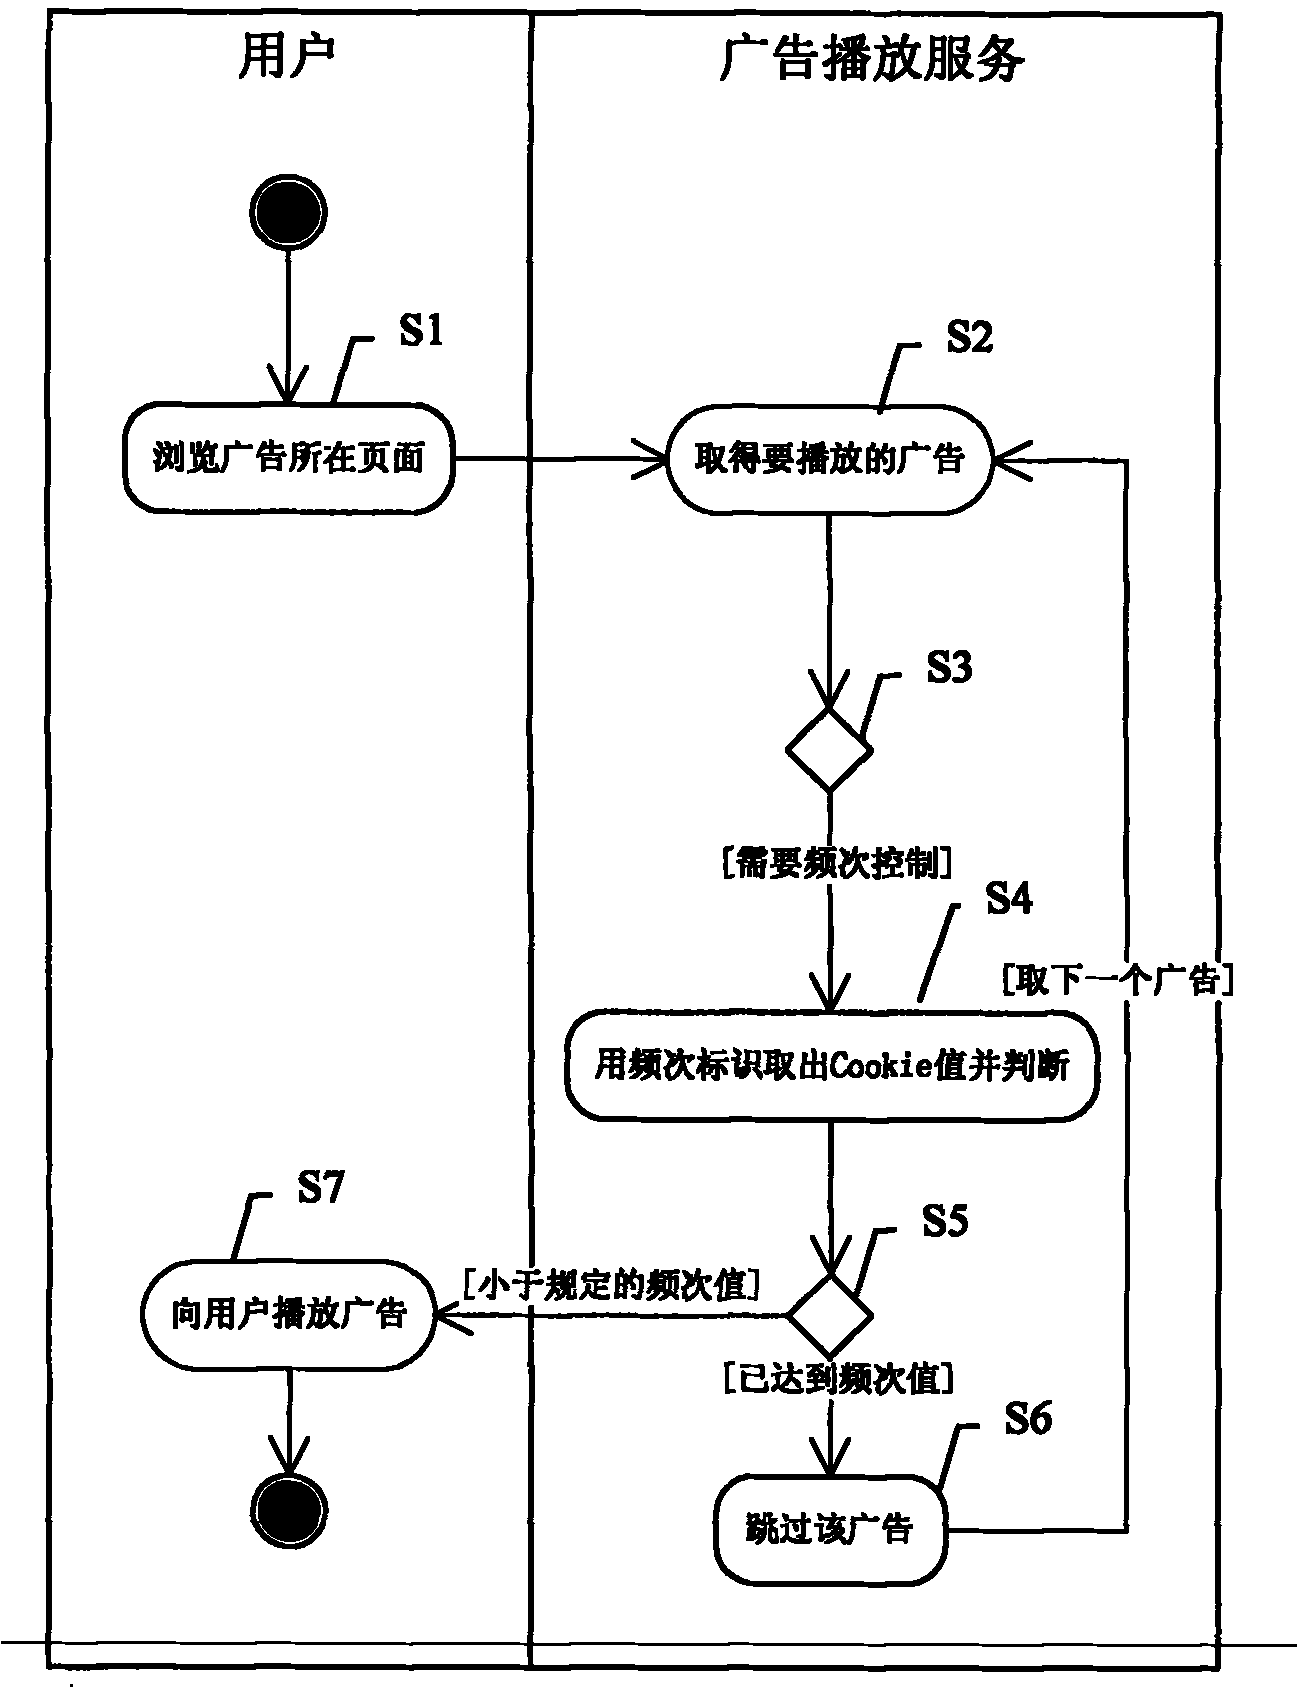 Multimedia frequency control method, equipment and system